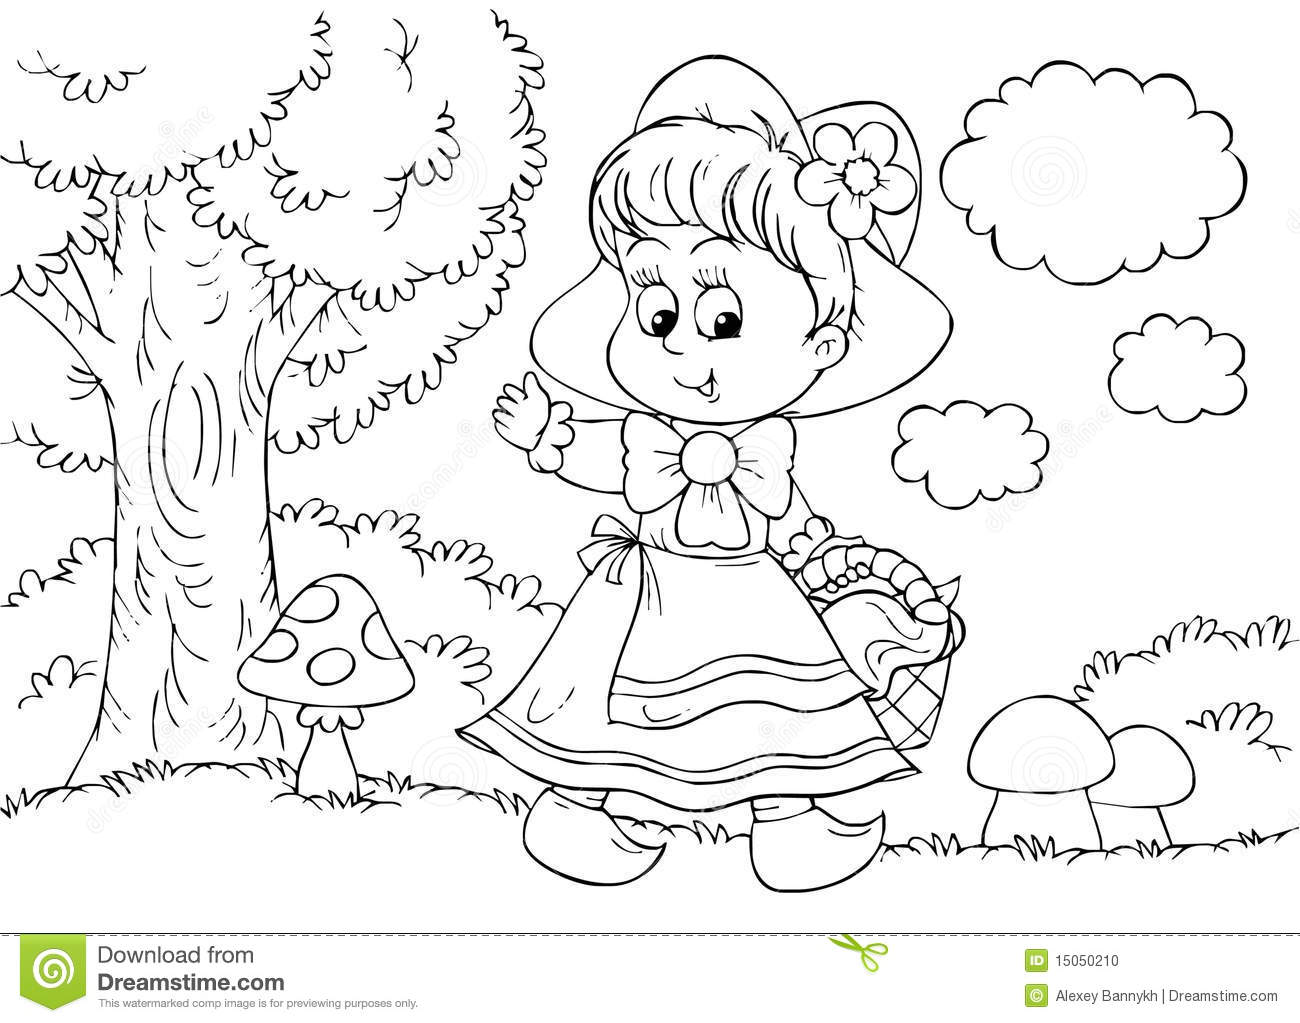 Little red riding hood coloring pages to download and print for free